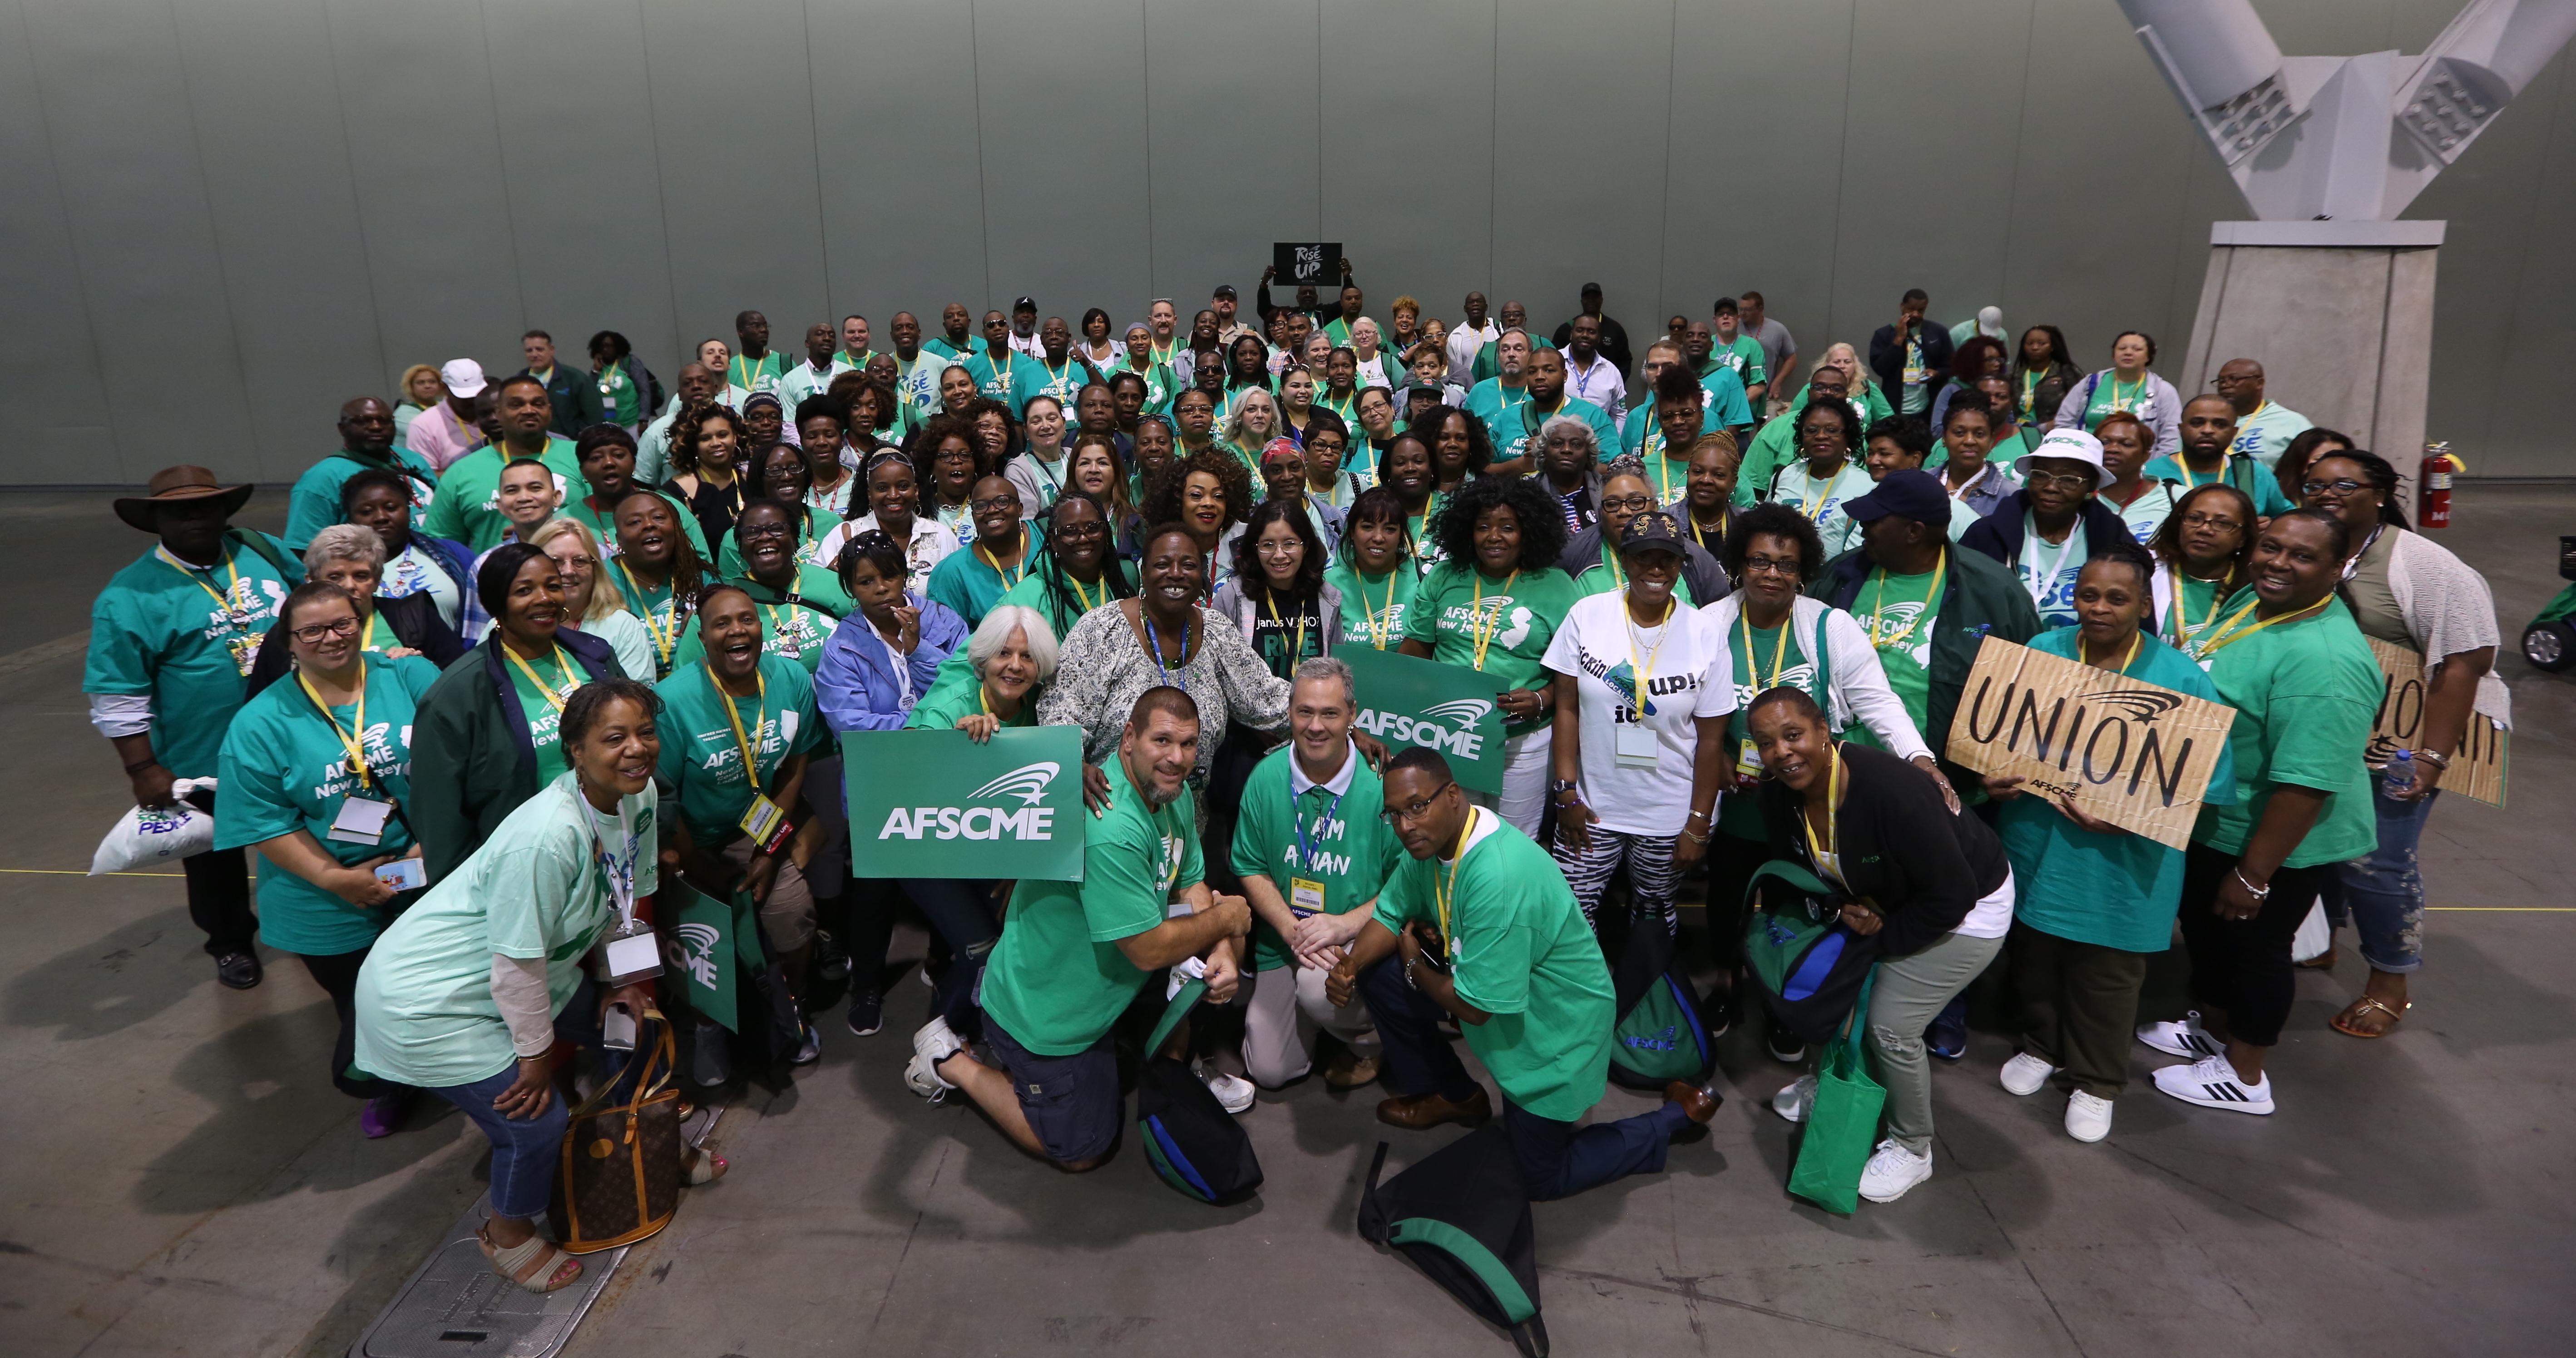 AFSCME NJ members at the 2018 AFSCME Convention